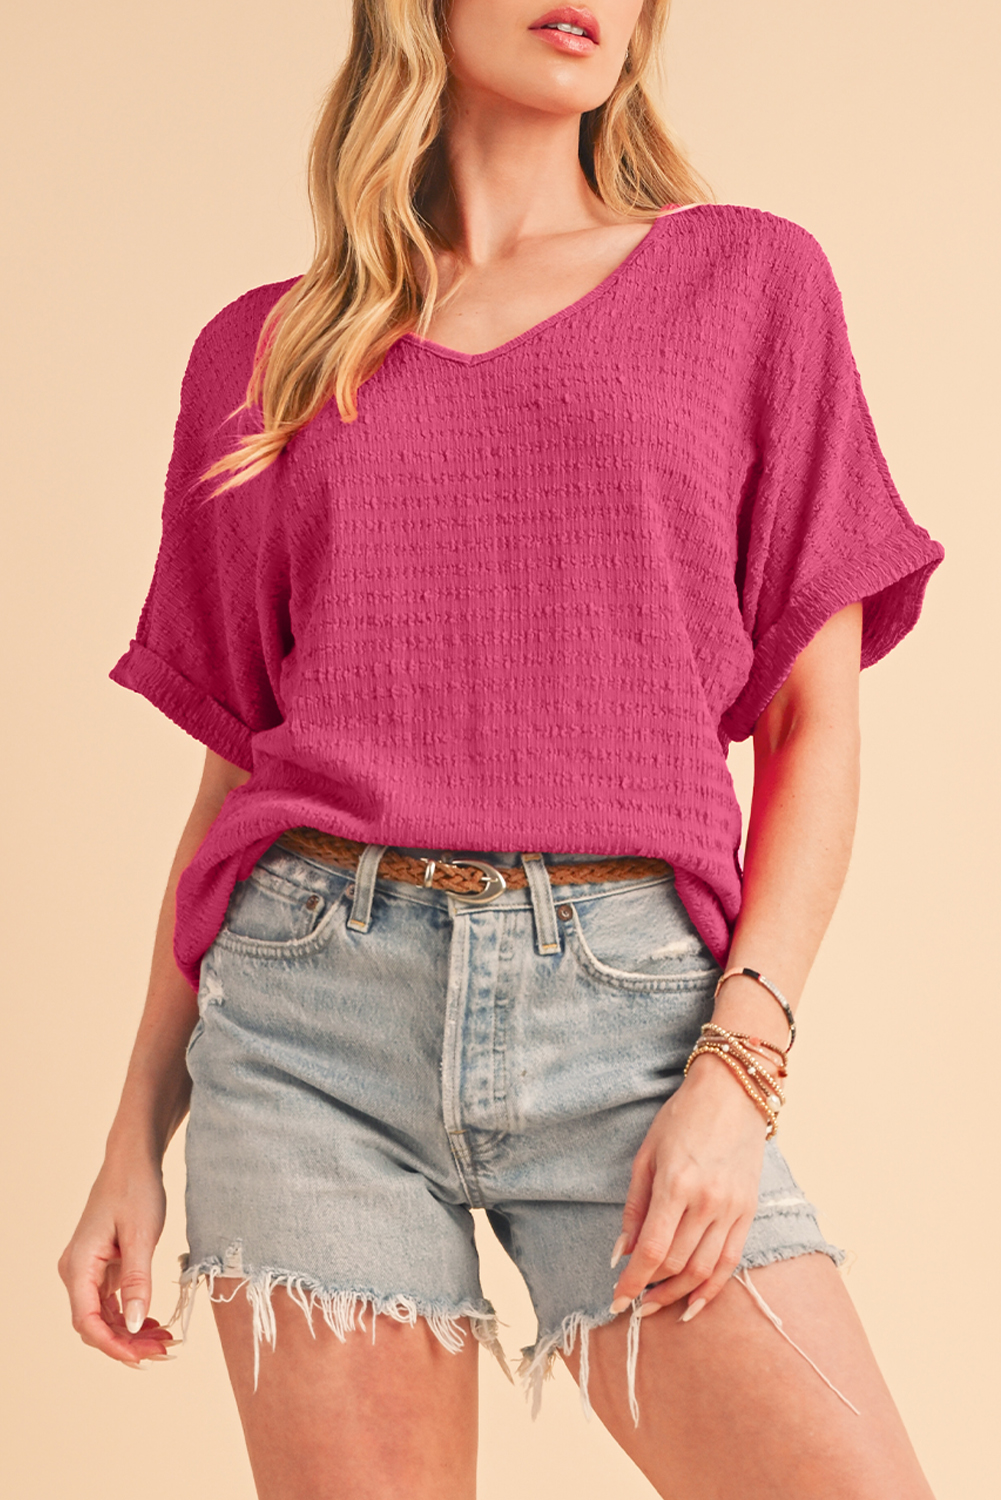 Shewin Wholesale Stores Bright Pink Textured Rolled Sleeve V Neck T SHIRT